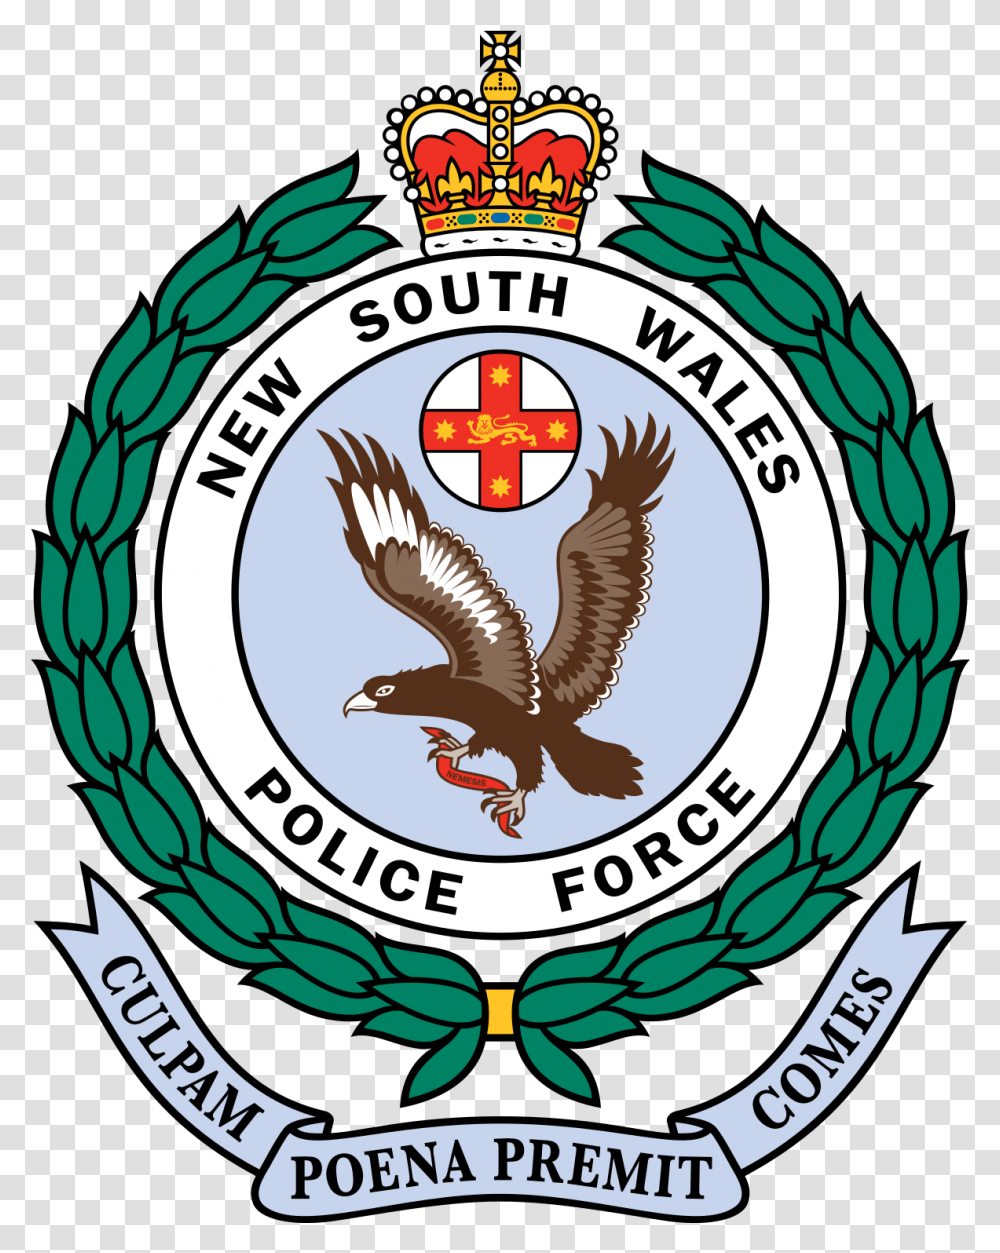 New South Wales Police Force Wikipedia New South Wales Police Logo, Symbol, Trademark, Emblem, Poster Transparent Png